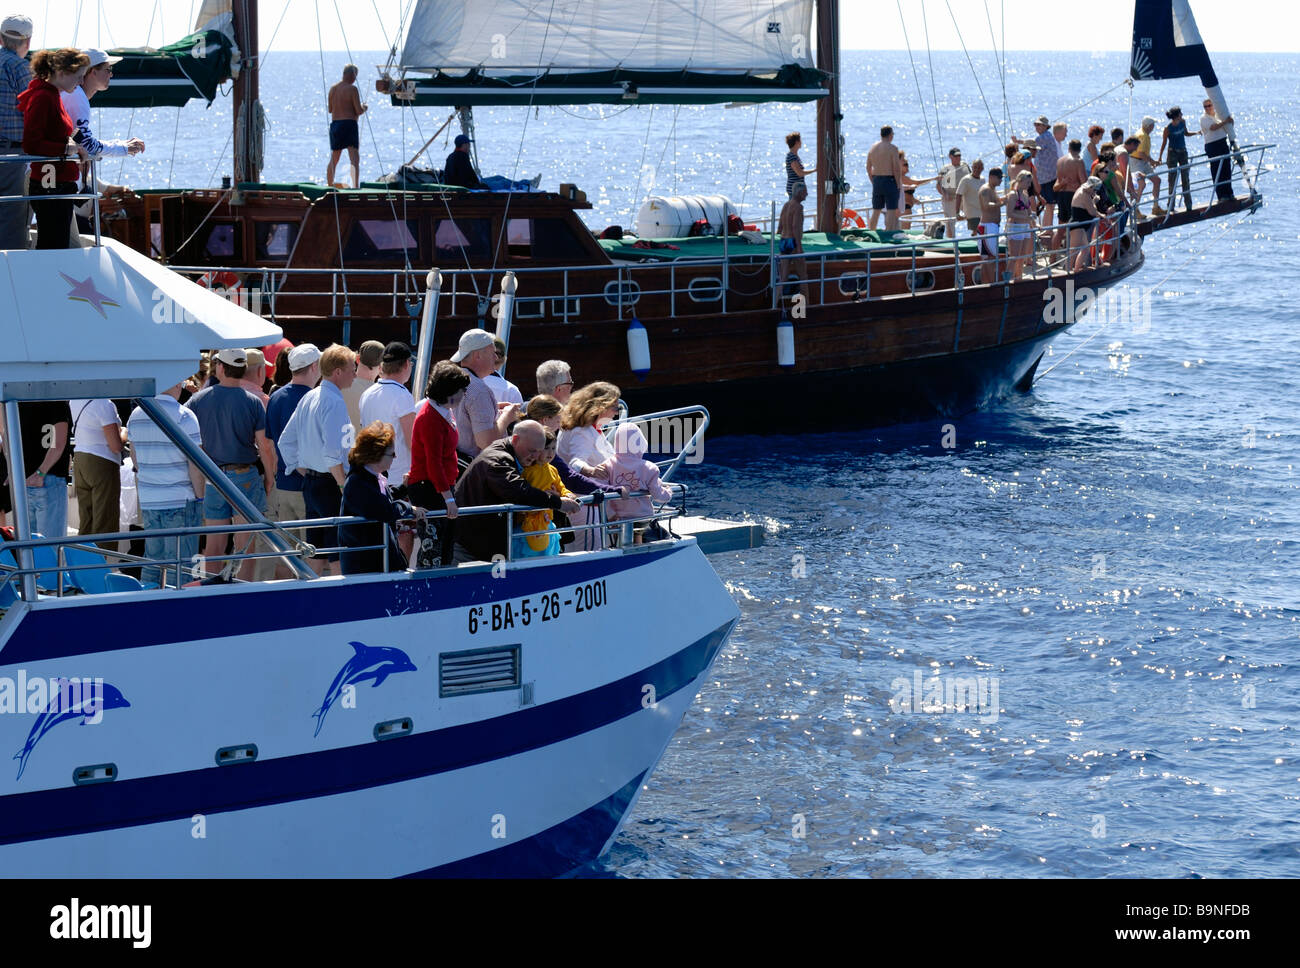 The exciment among the tourists on the dolphin search boats, Puerto Rico, Gran Canaria, Canary Islands, Spain, Europe. Stock Photo